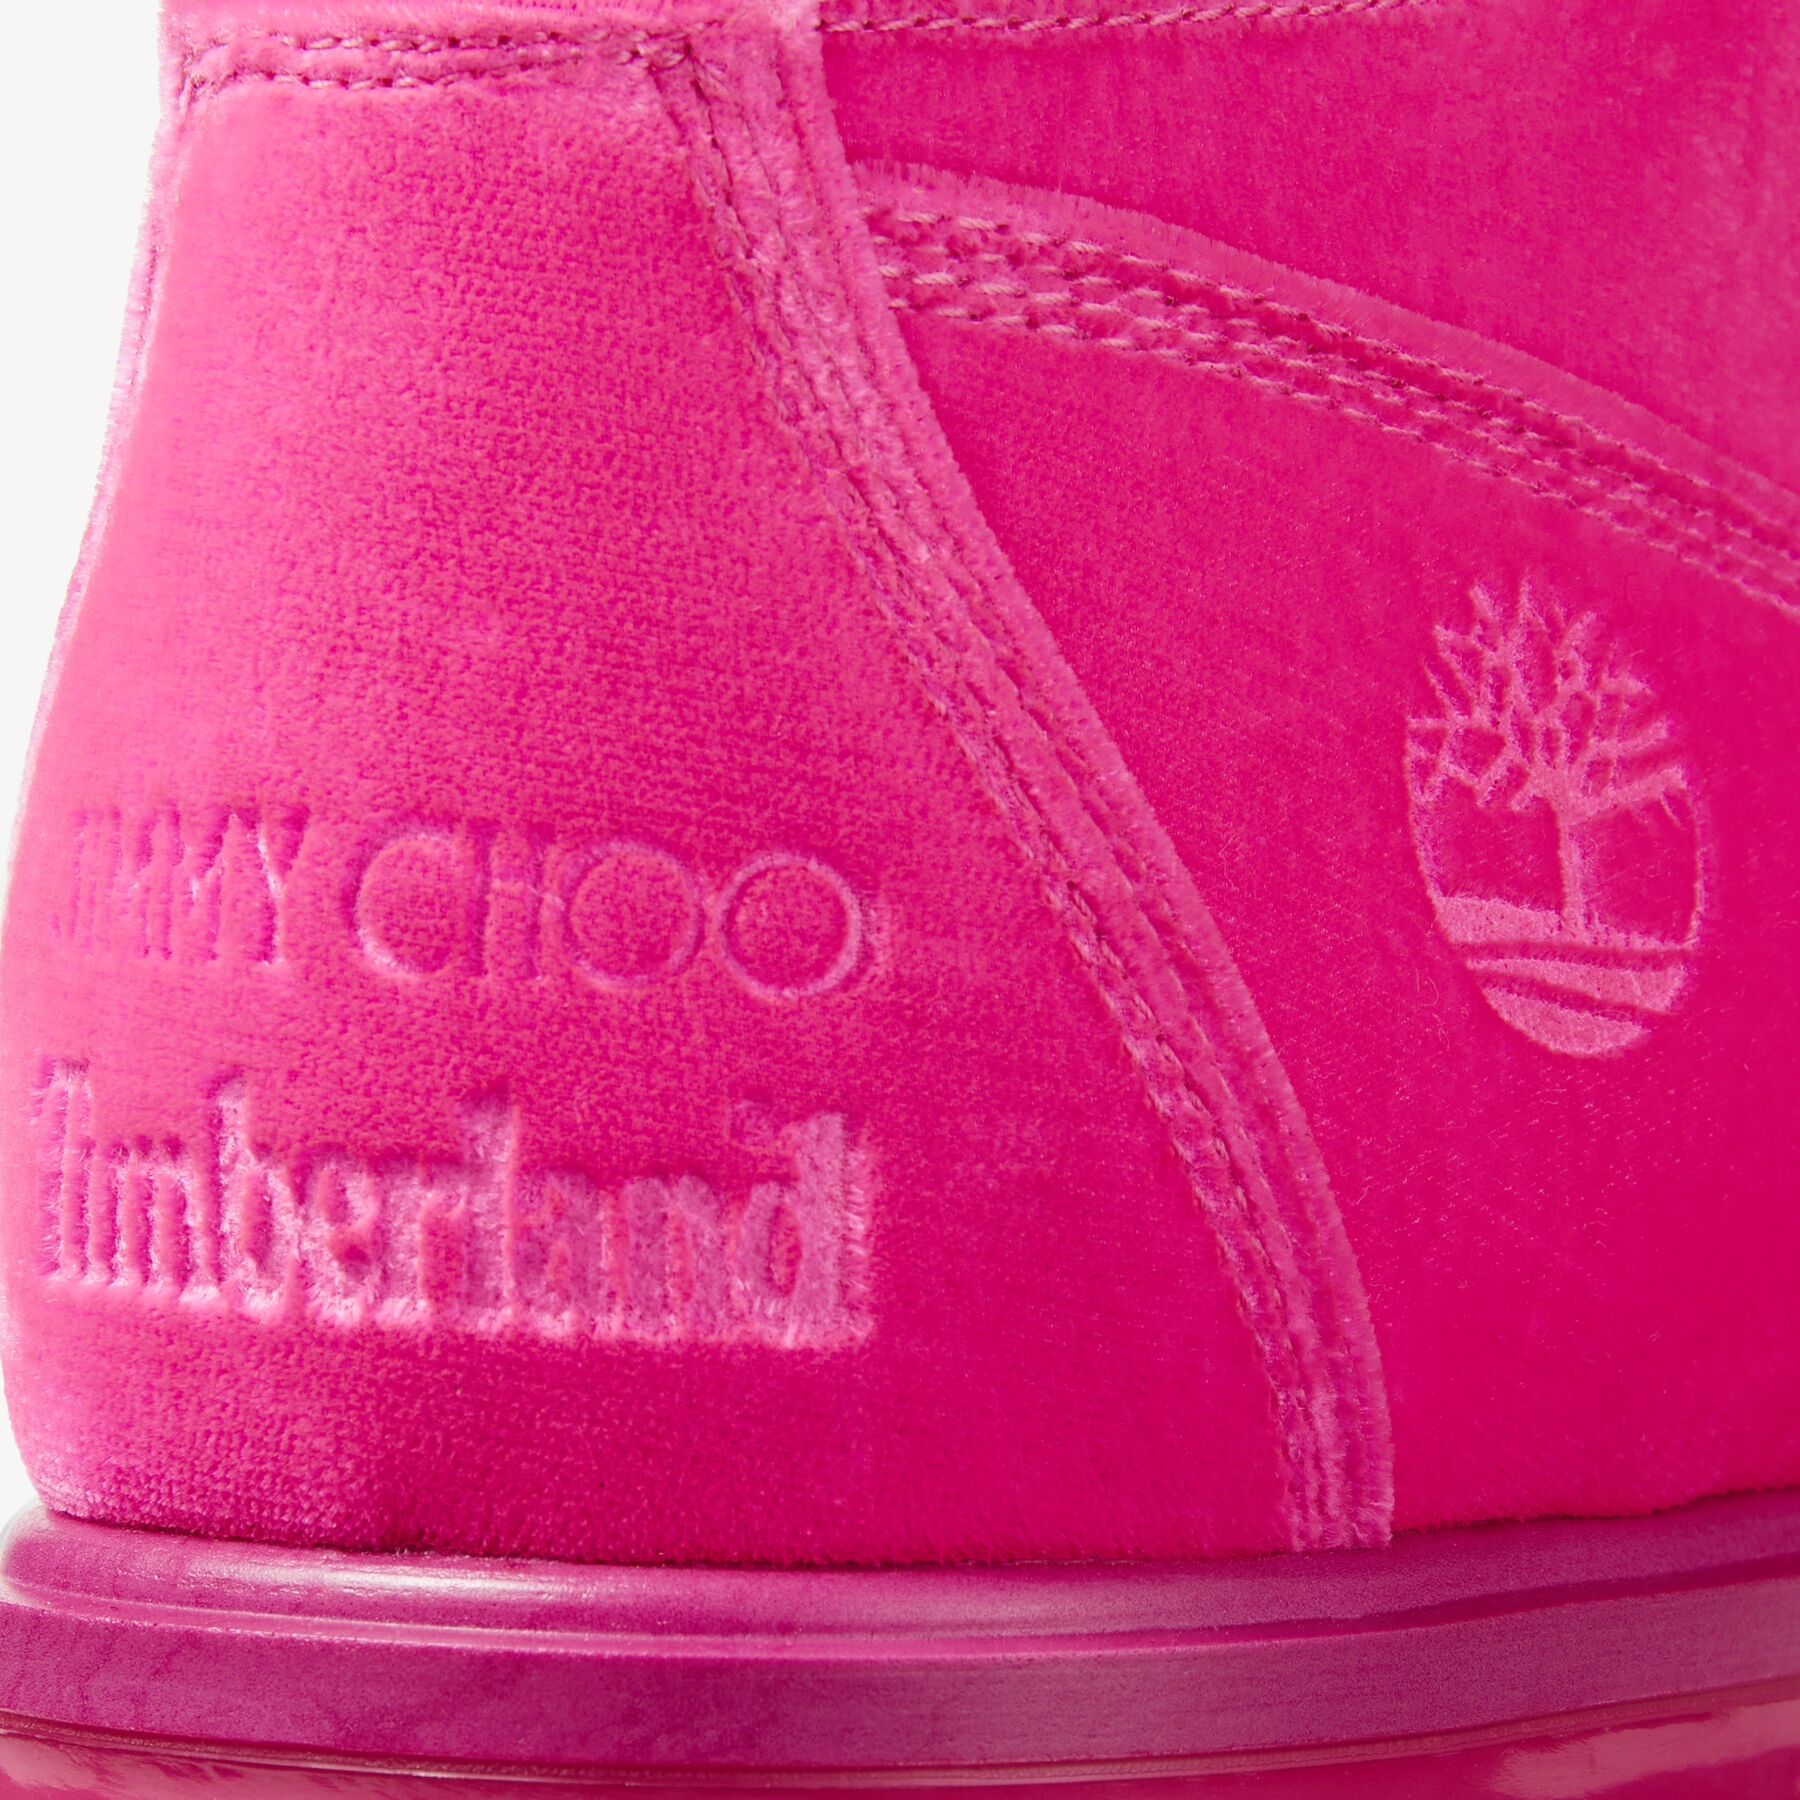 JIMMY CHOO X TIMBERLAND 8 INCH PUFFER BOOT
Hot Pink Timberland Velvet Ankle Boots - 3